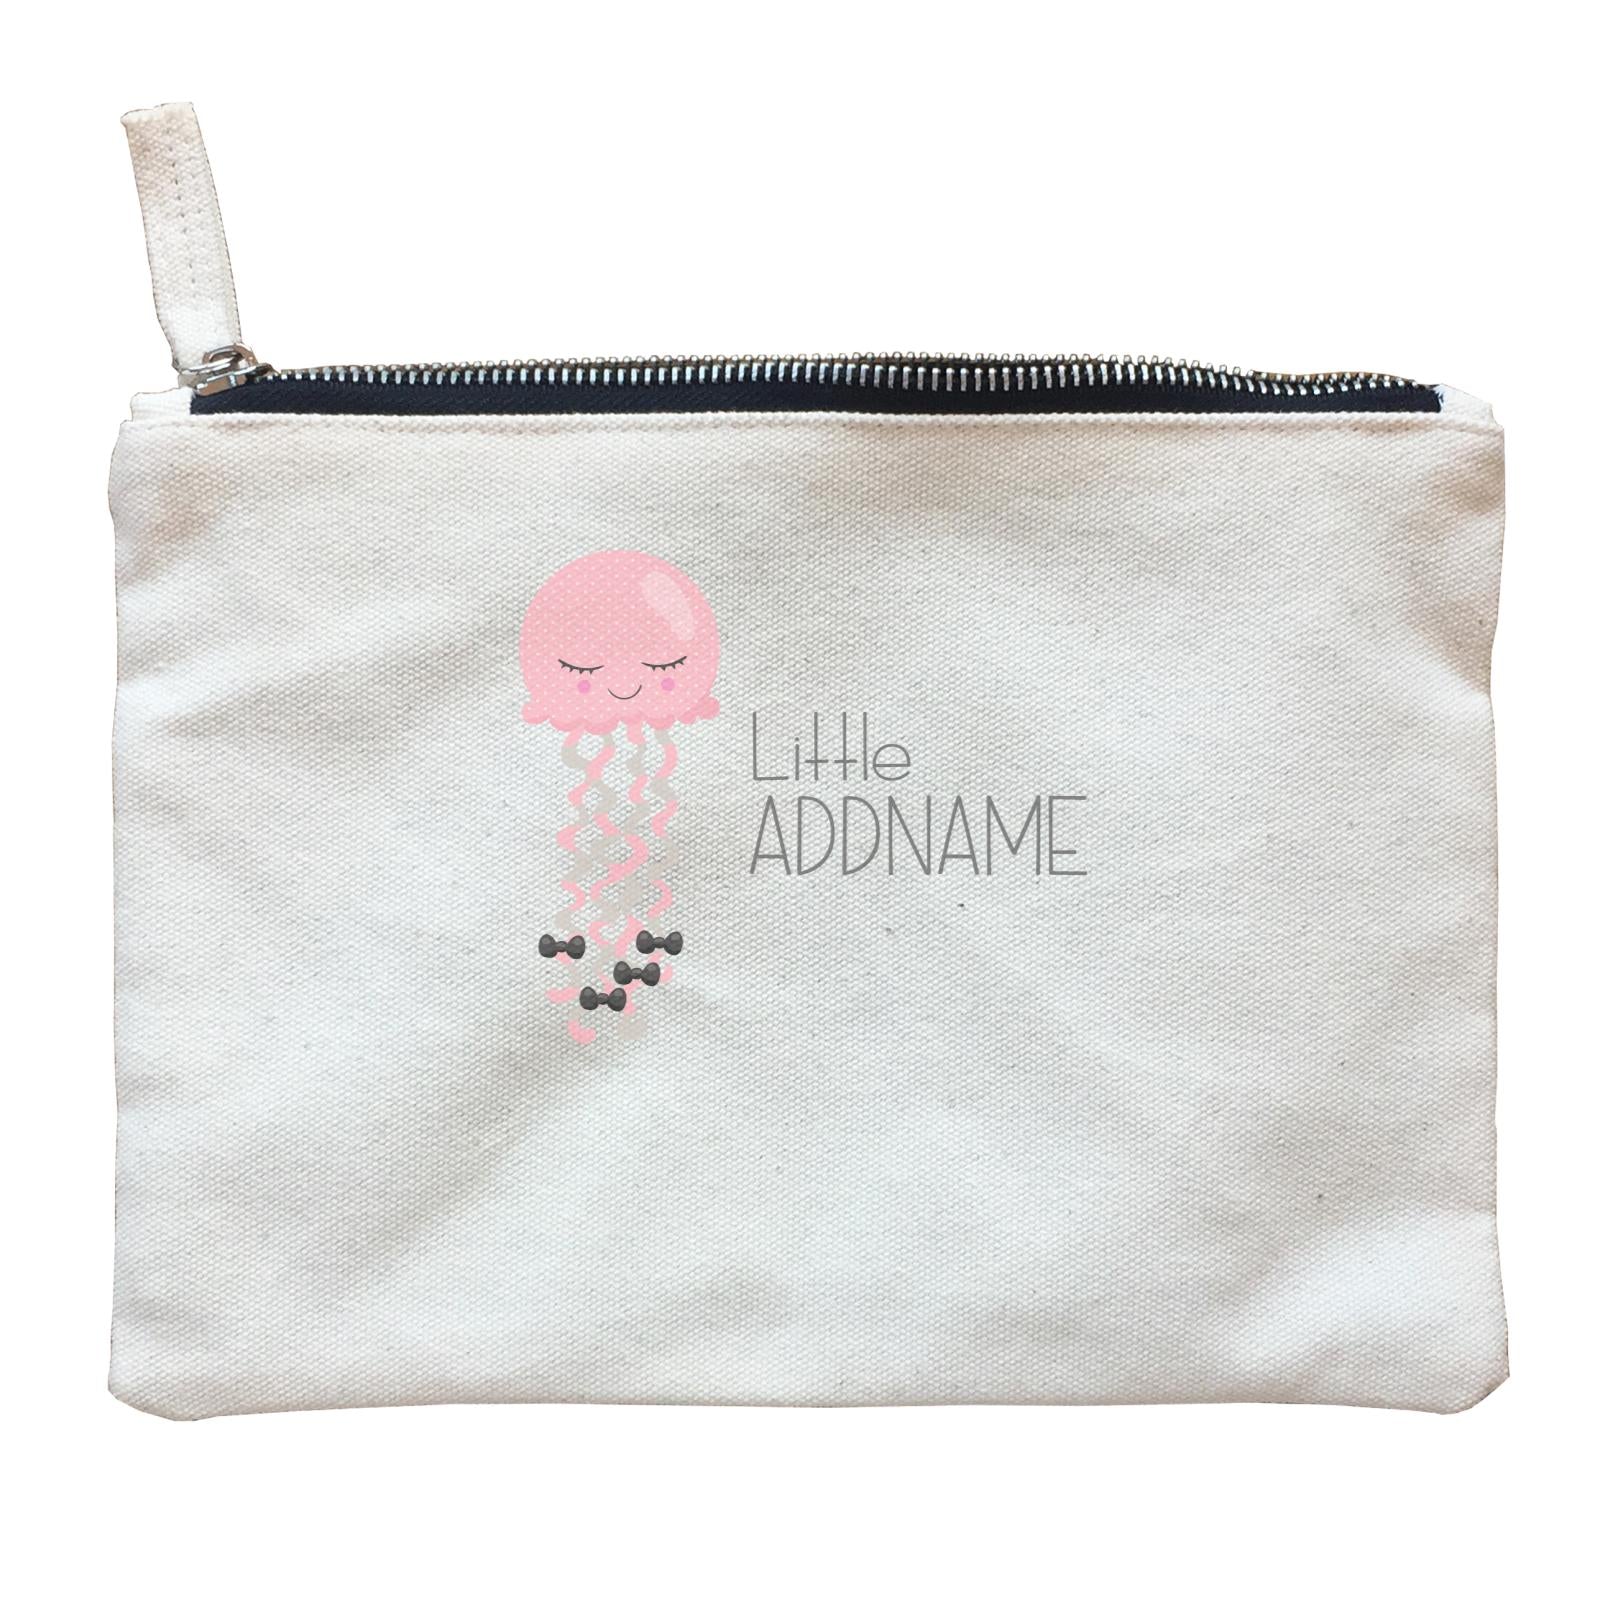 Nursery Animals LIttle Pink Jellyfish with Ribbons Addname Zipper Pouch